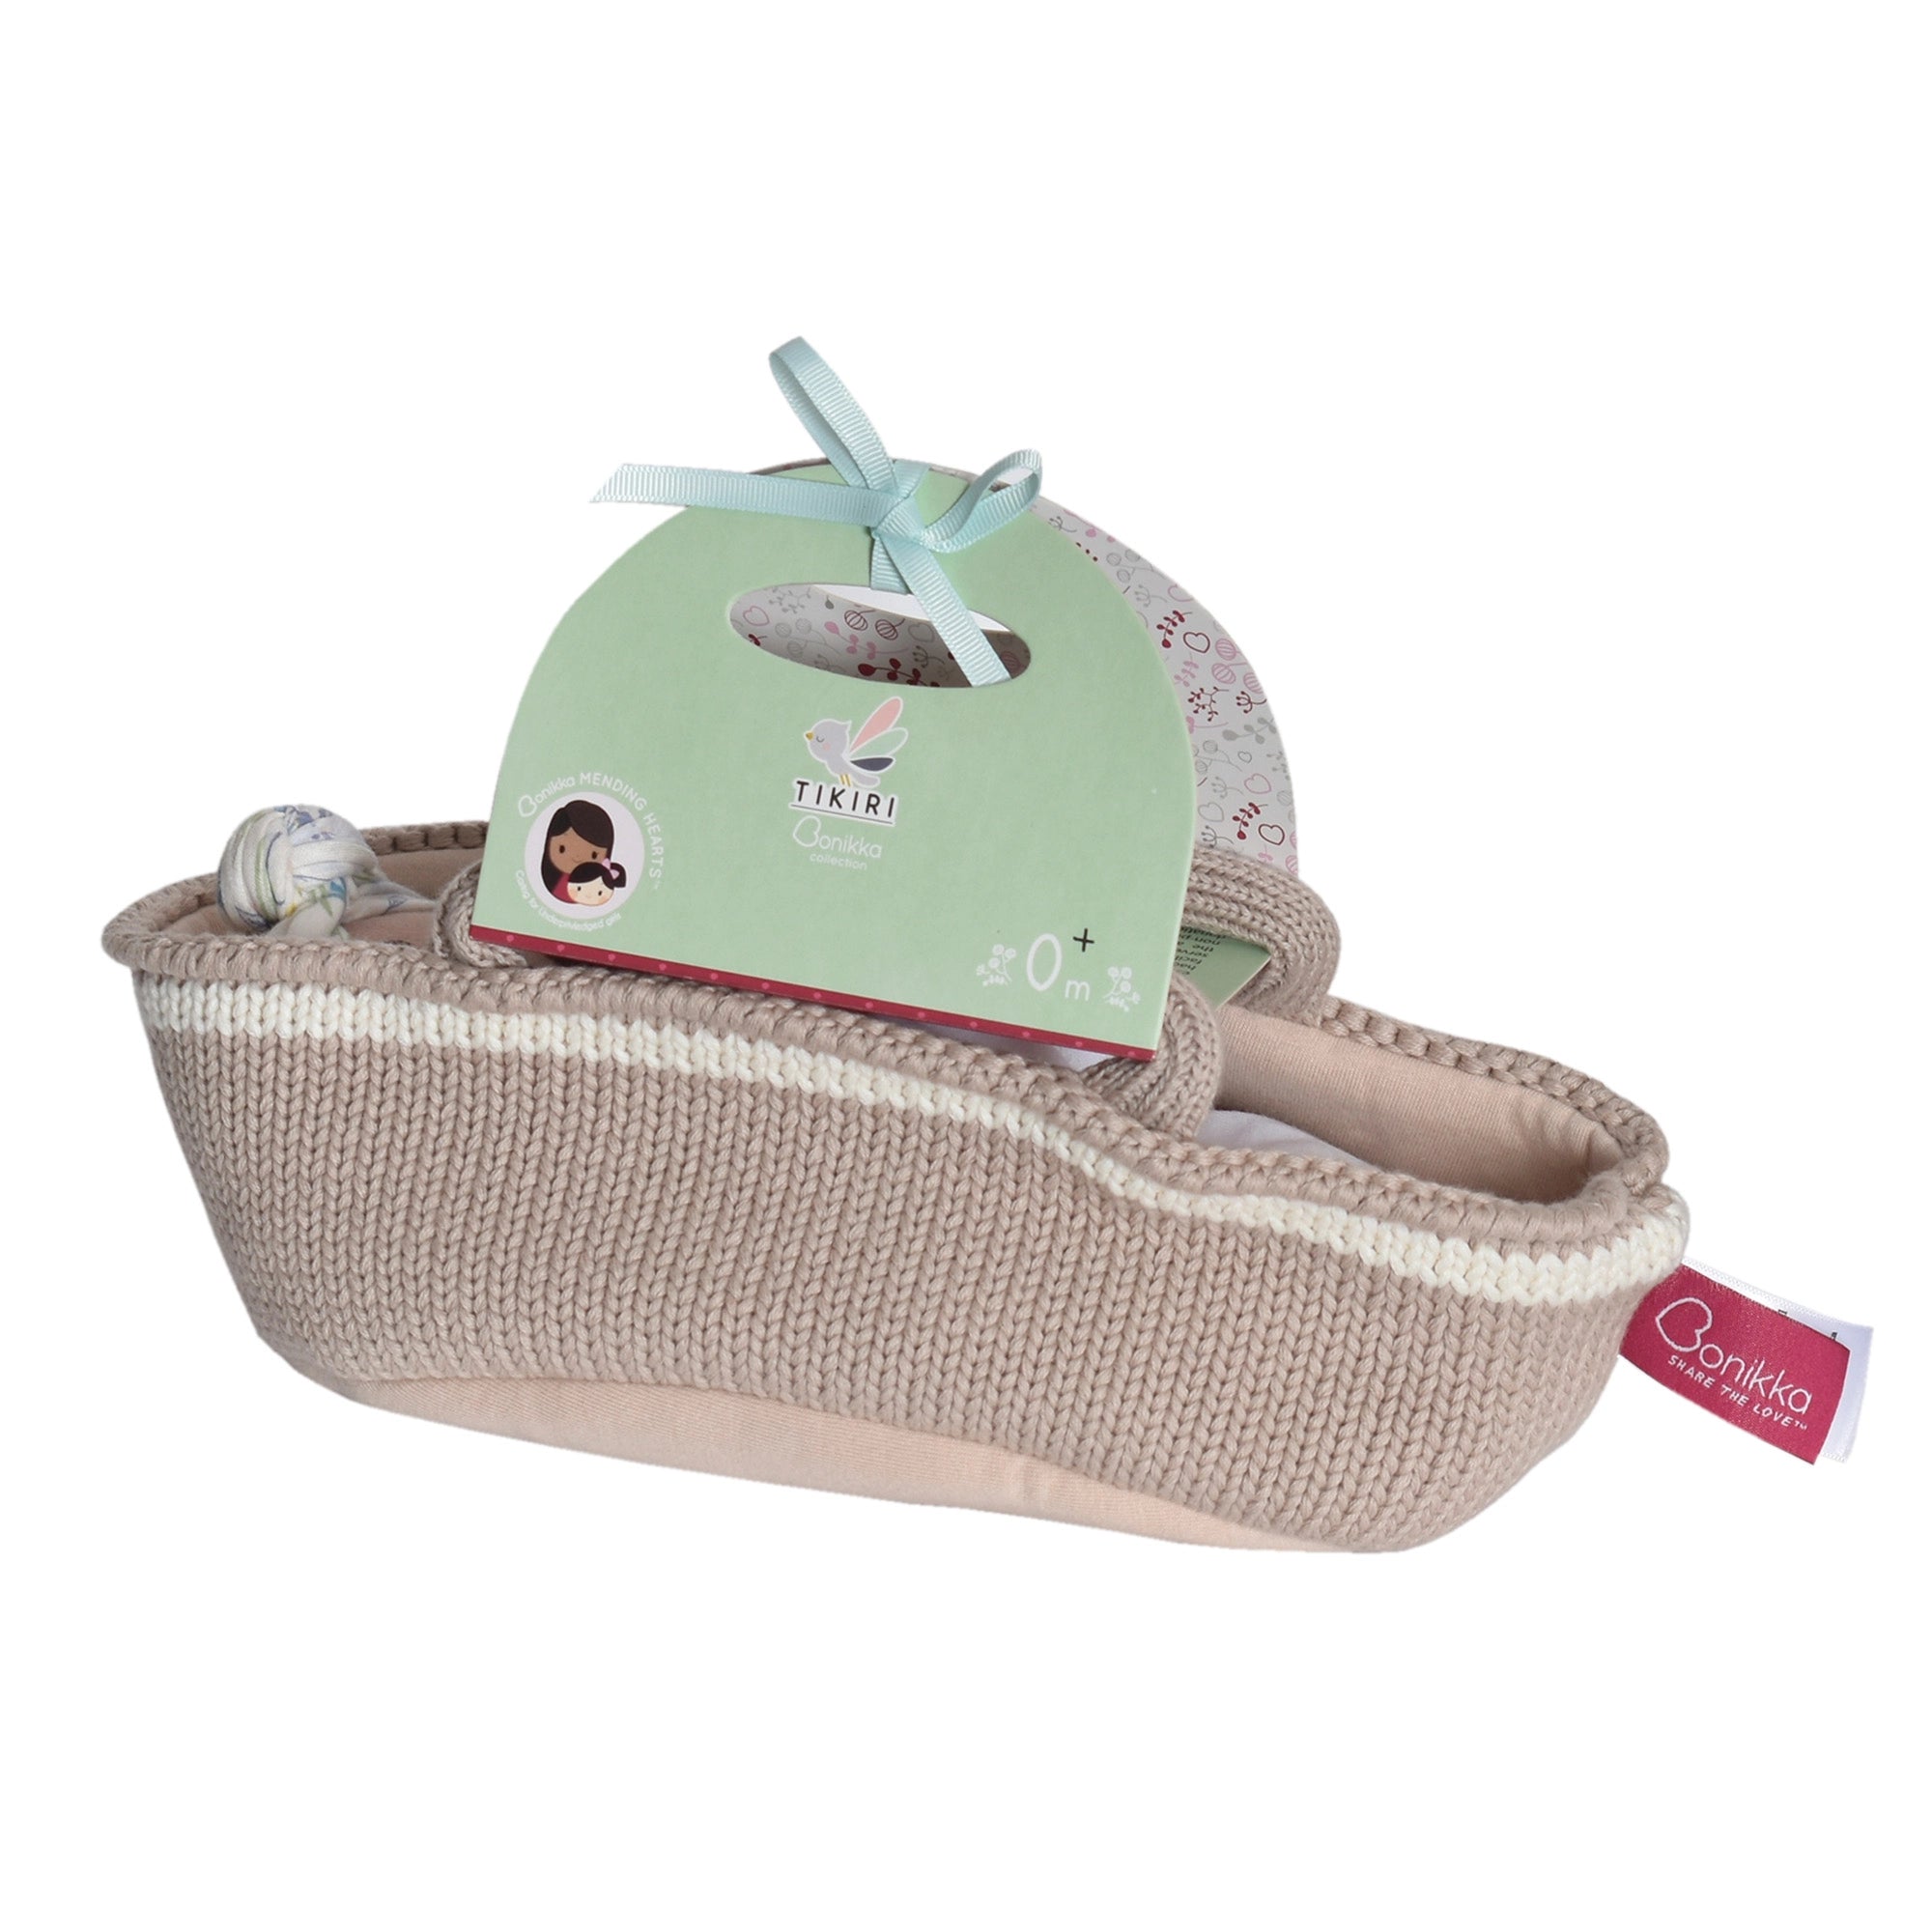 Knitted Carry Cot with Rheya Baby - Dark Skin, Soother & Blanket